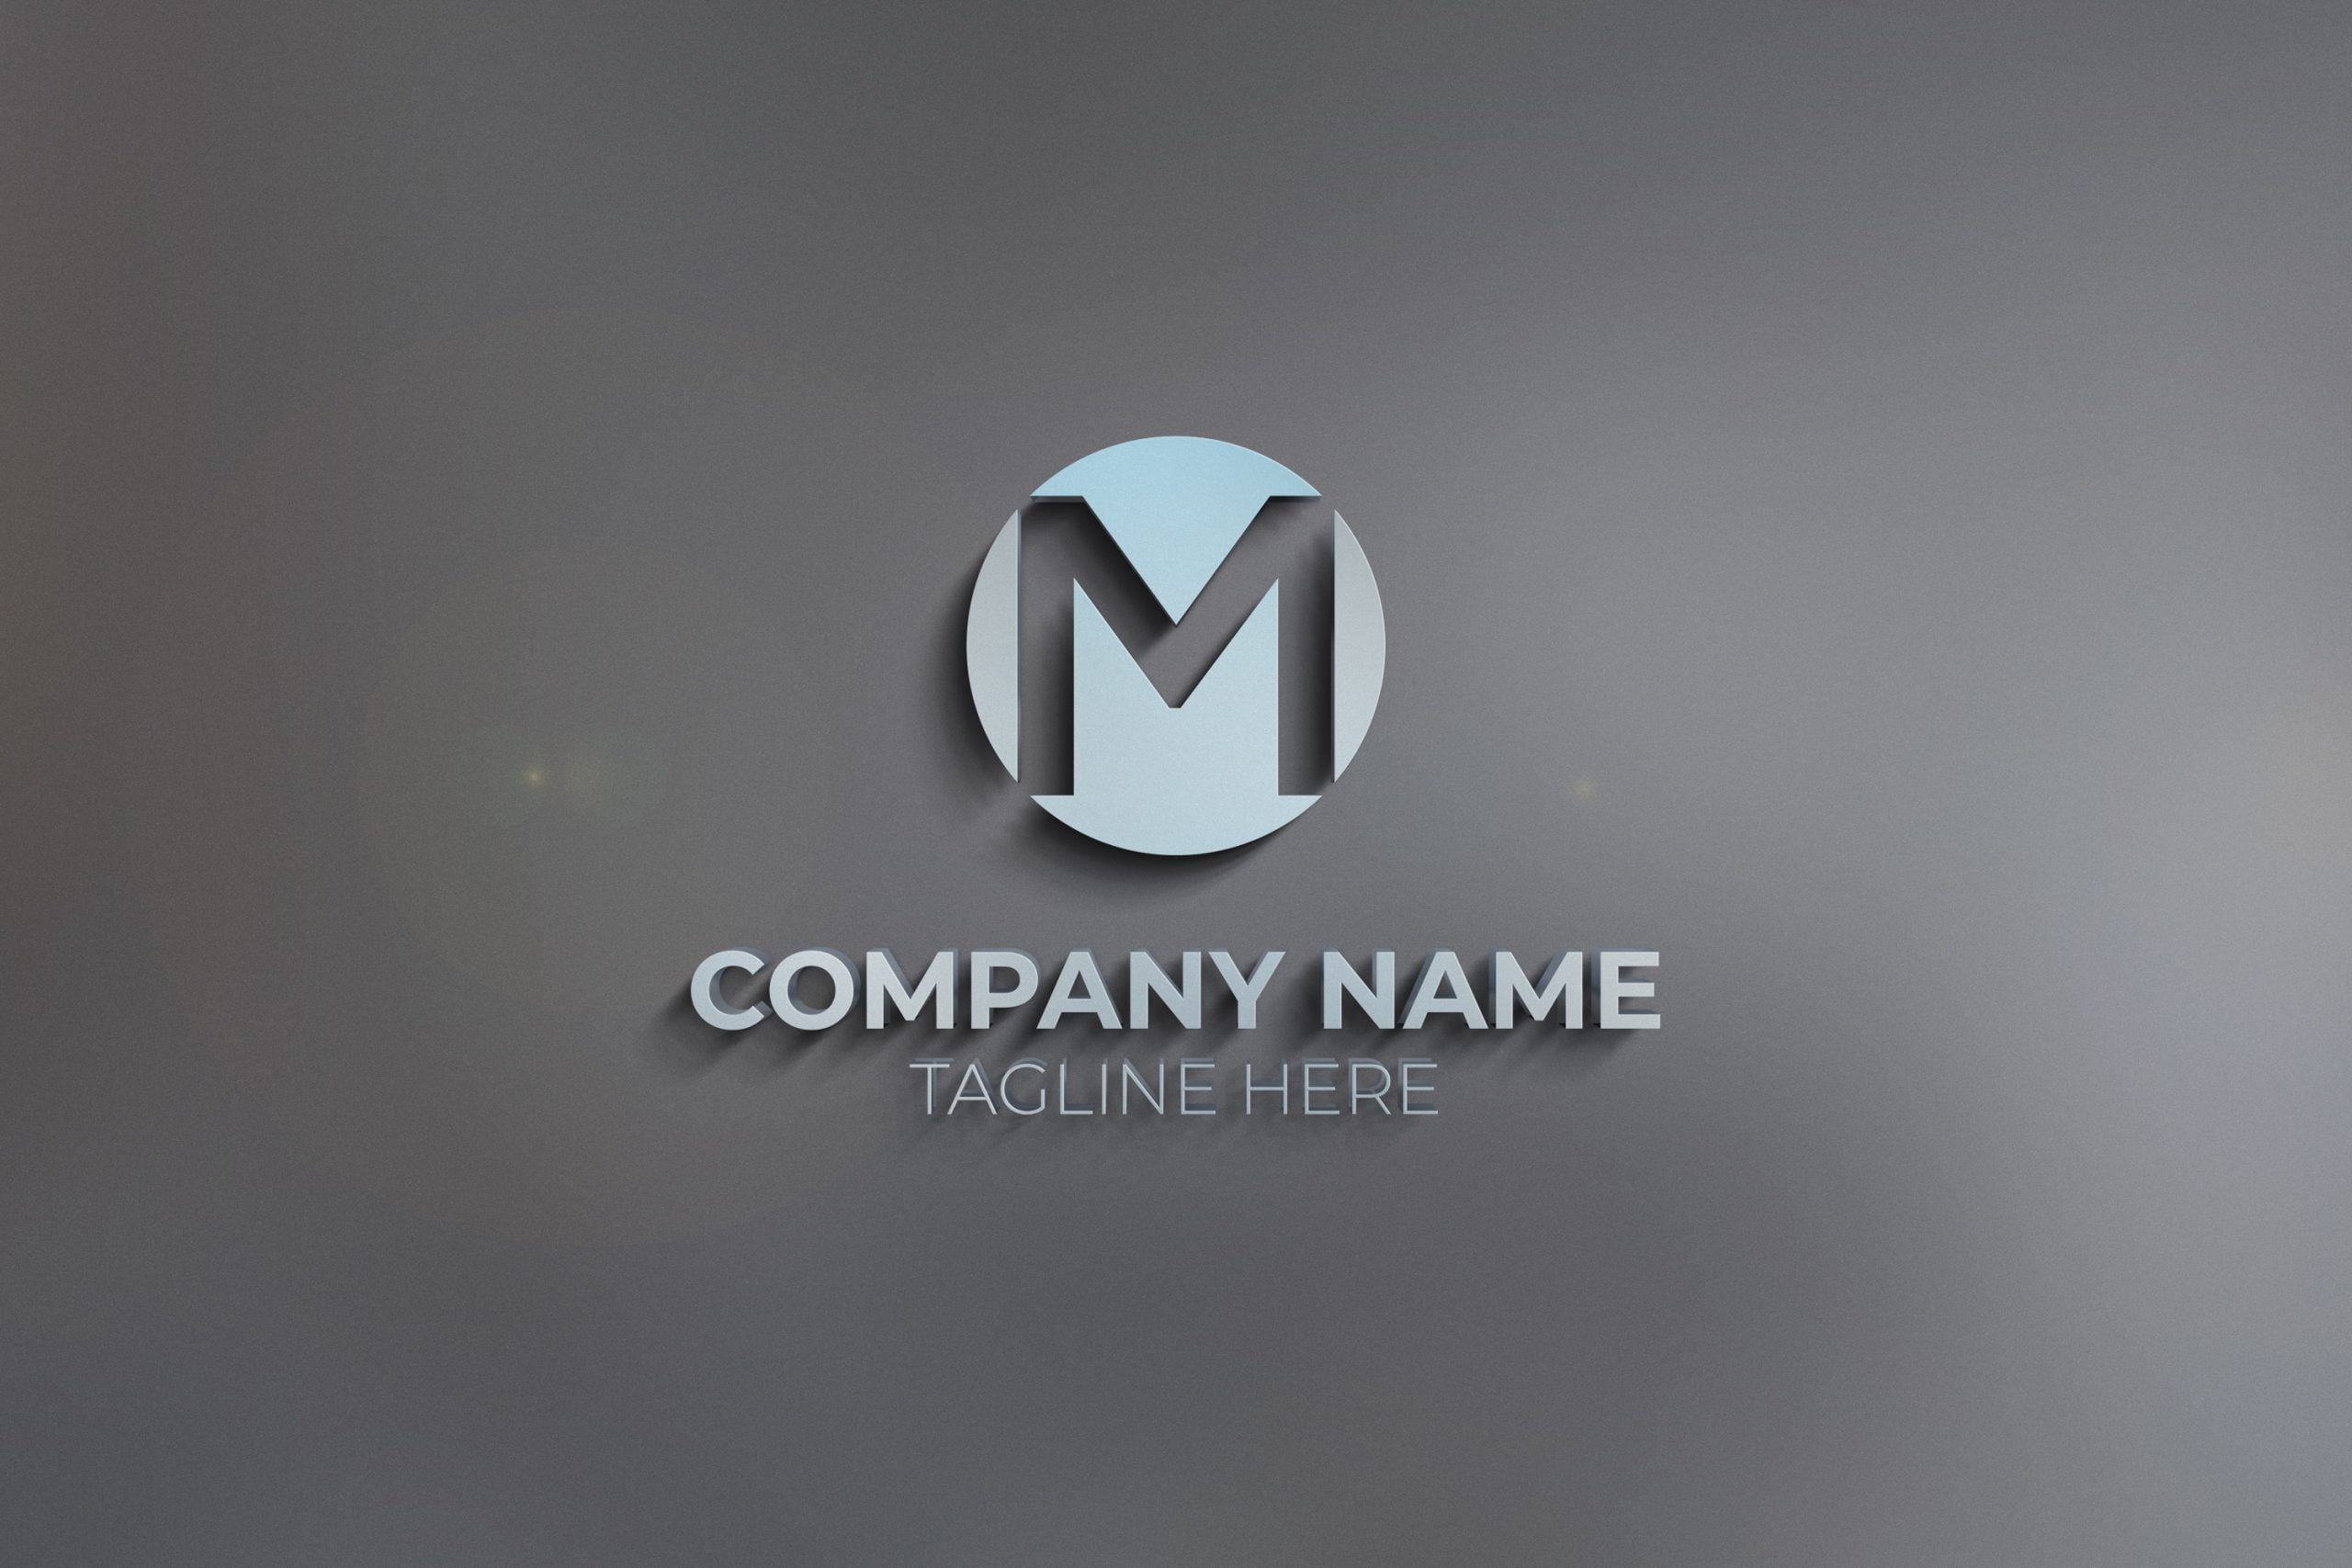 Creative Initial M Letter logo free download – GraphicsFamily